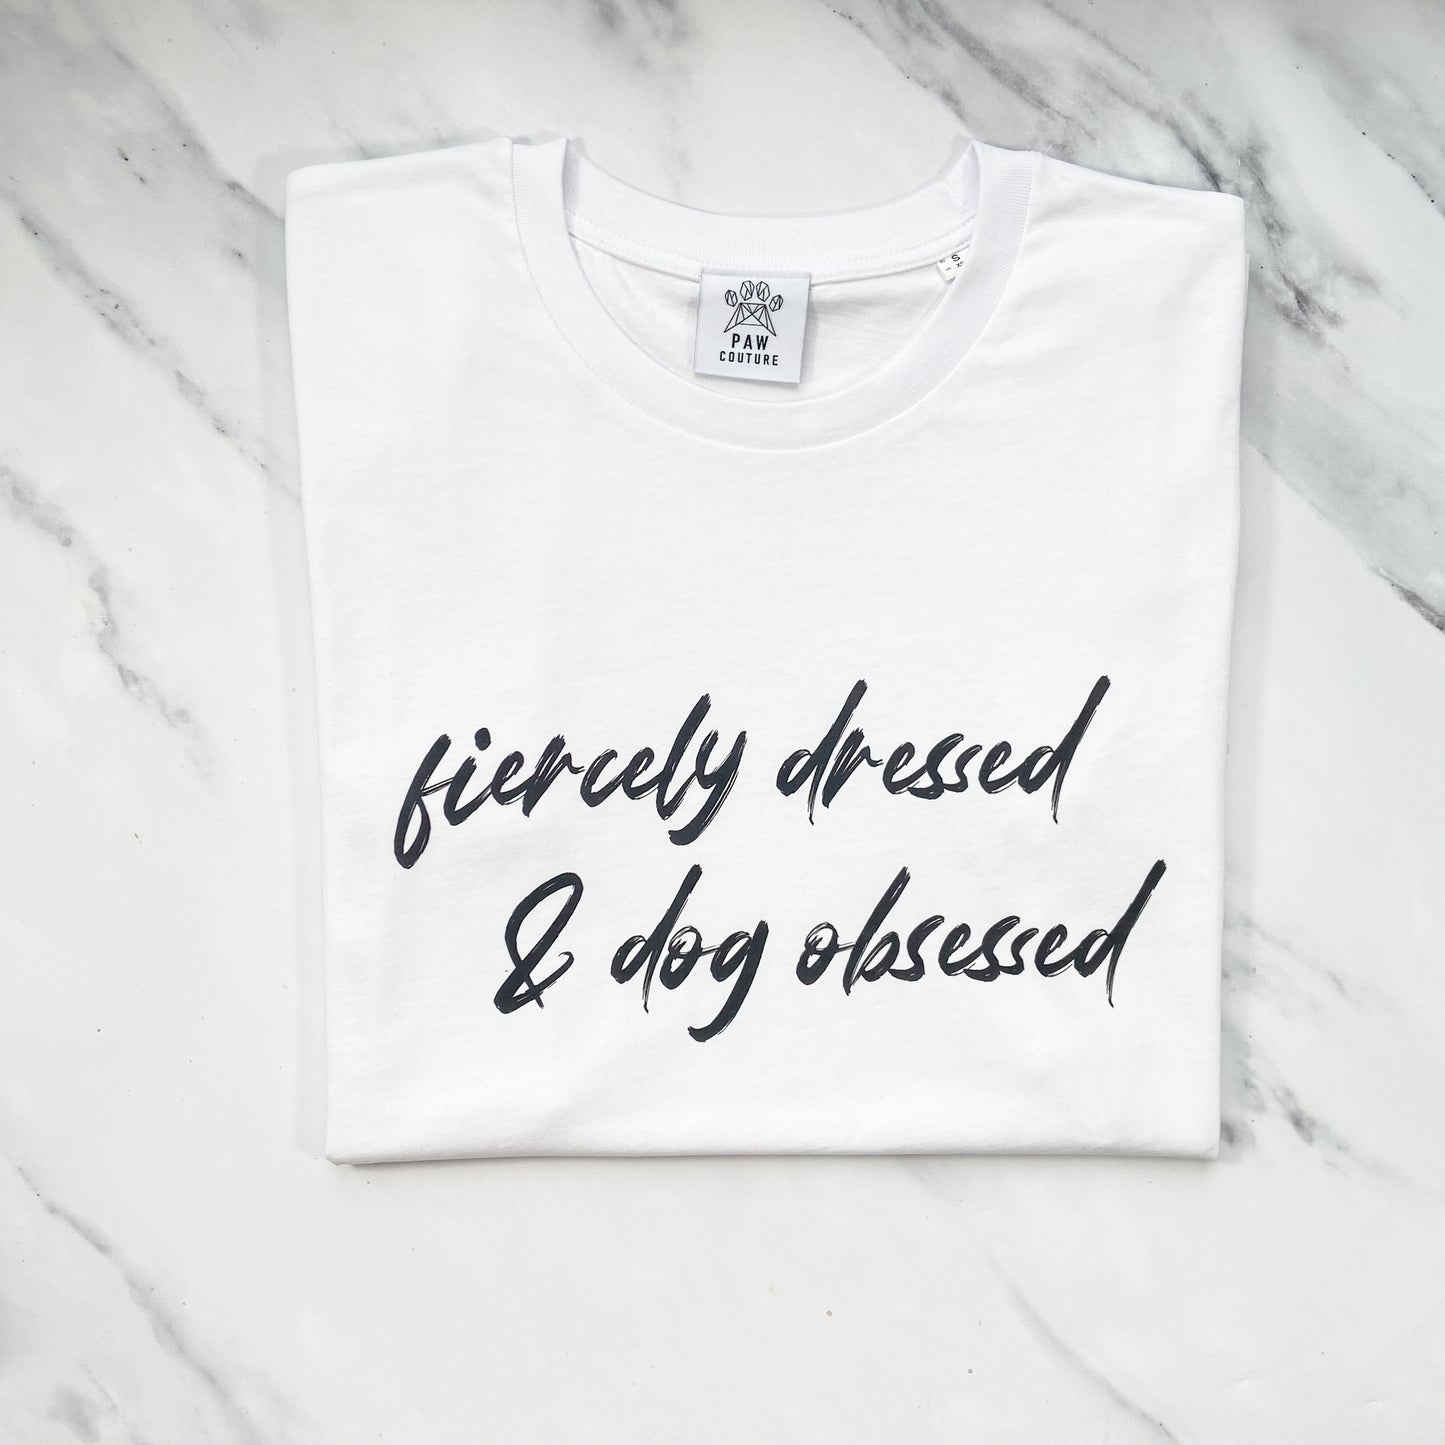 Fiercely Dressed & Dog Obsessed White T-shirt